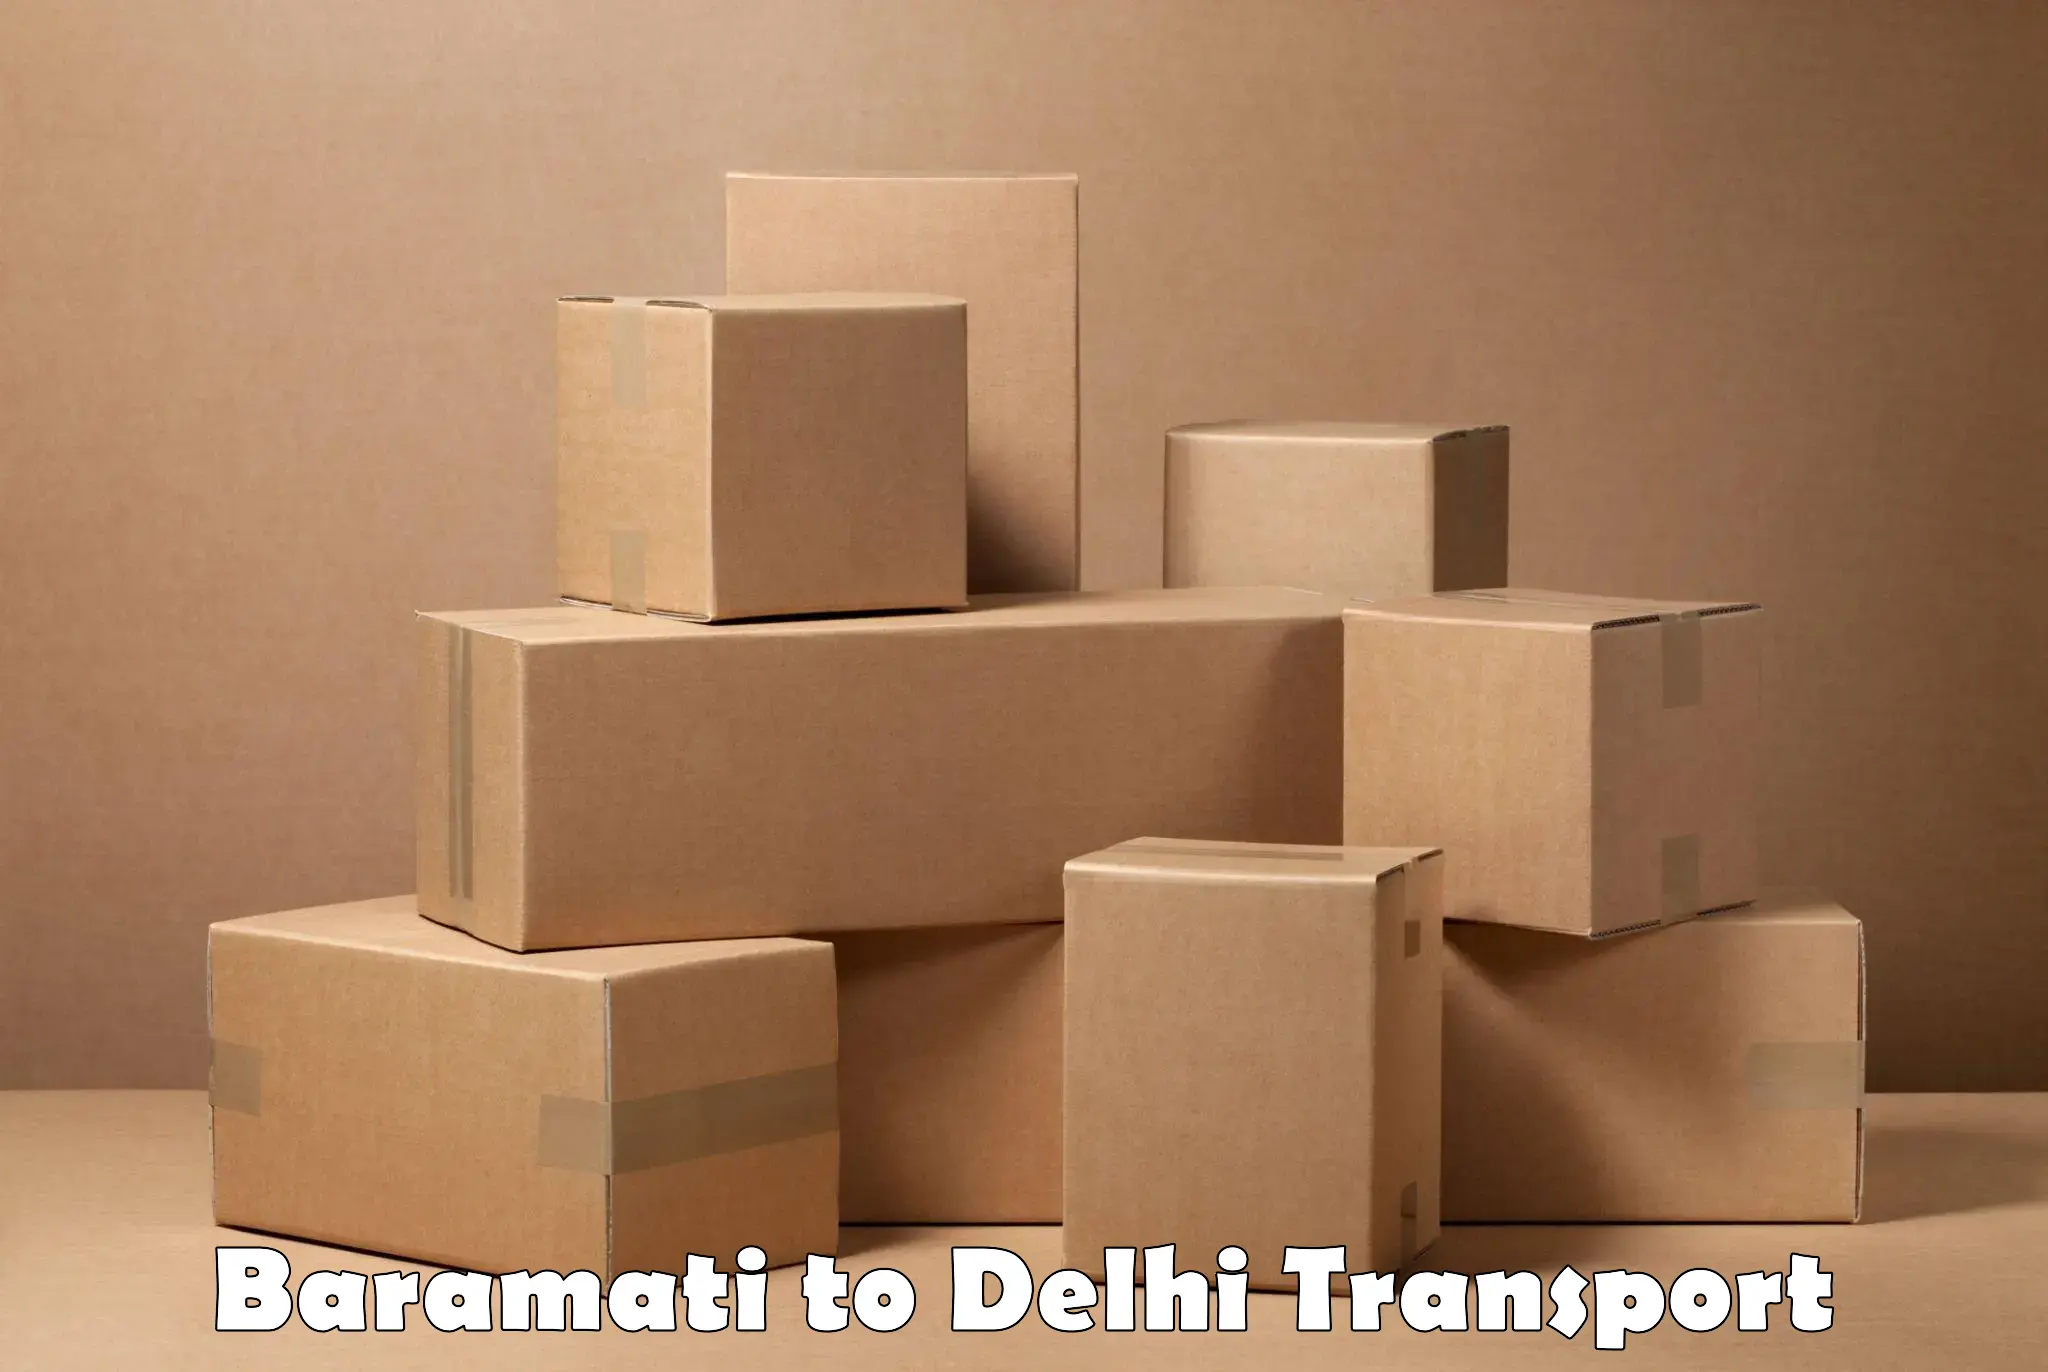 Truck transport companies in India Baramati to NCR